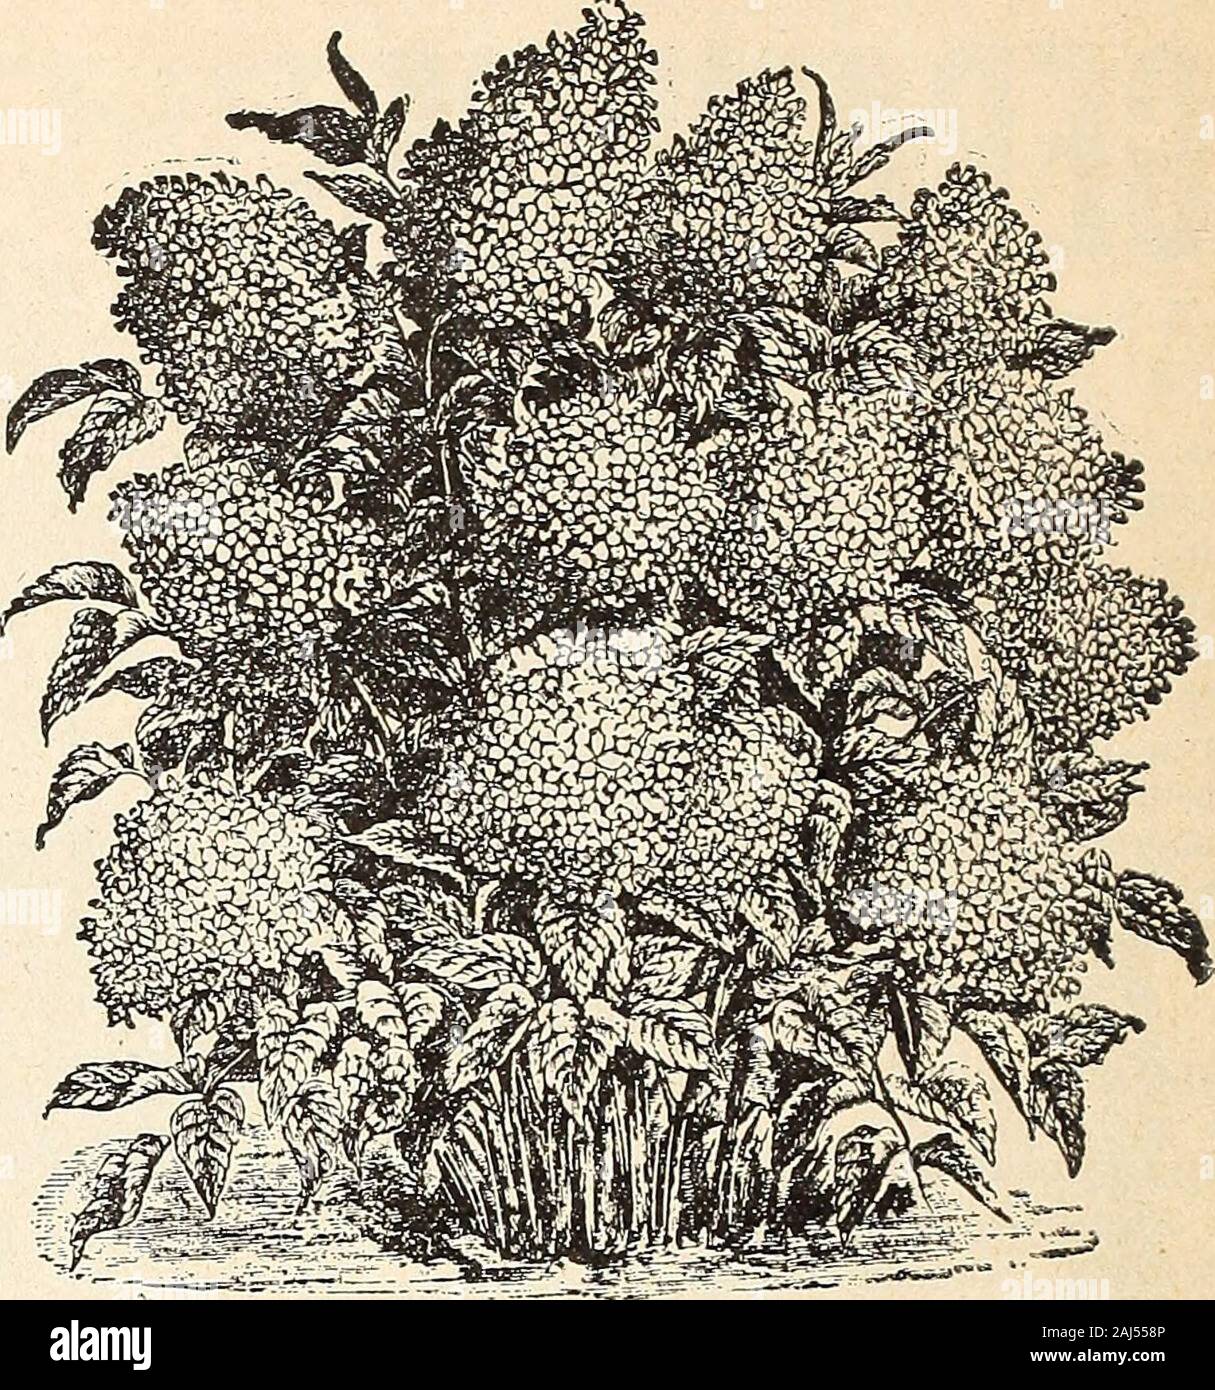 Horitucultural guide : spring 1892 . s. HYDRANGEAS. *RED BRANCHED—New—This new Hydrangea is declaredby the introducers to be the best of the Hortensis class everproduced. The trusses are larger and brighter than thoseof Otaska, and it produces bloom in great profusion. Price,each, 75 cts. NEW DOUBLE PINK (H. Stellata Rubra Plena)—This is avaluable acquisition. The flowers are perfectly doubleand are a beautiful rosy-red in color. It is a singularlybeautiful object when in full bloom. As hardy as otherJapan sorts. Price, each, 50 cts. NEW WHITE FRINGED (H. Stellata Fimbrlata^—A veryhandsome var Stock Photo